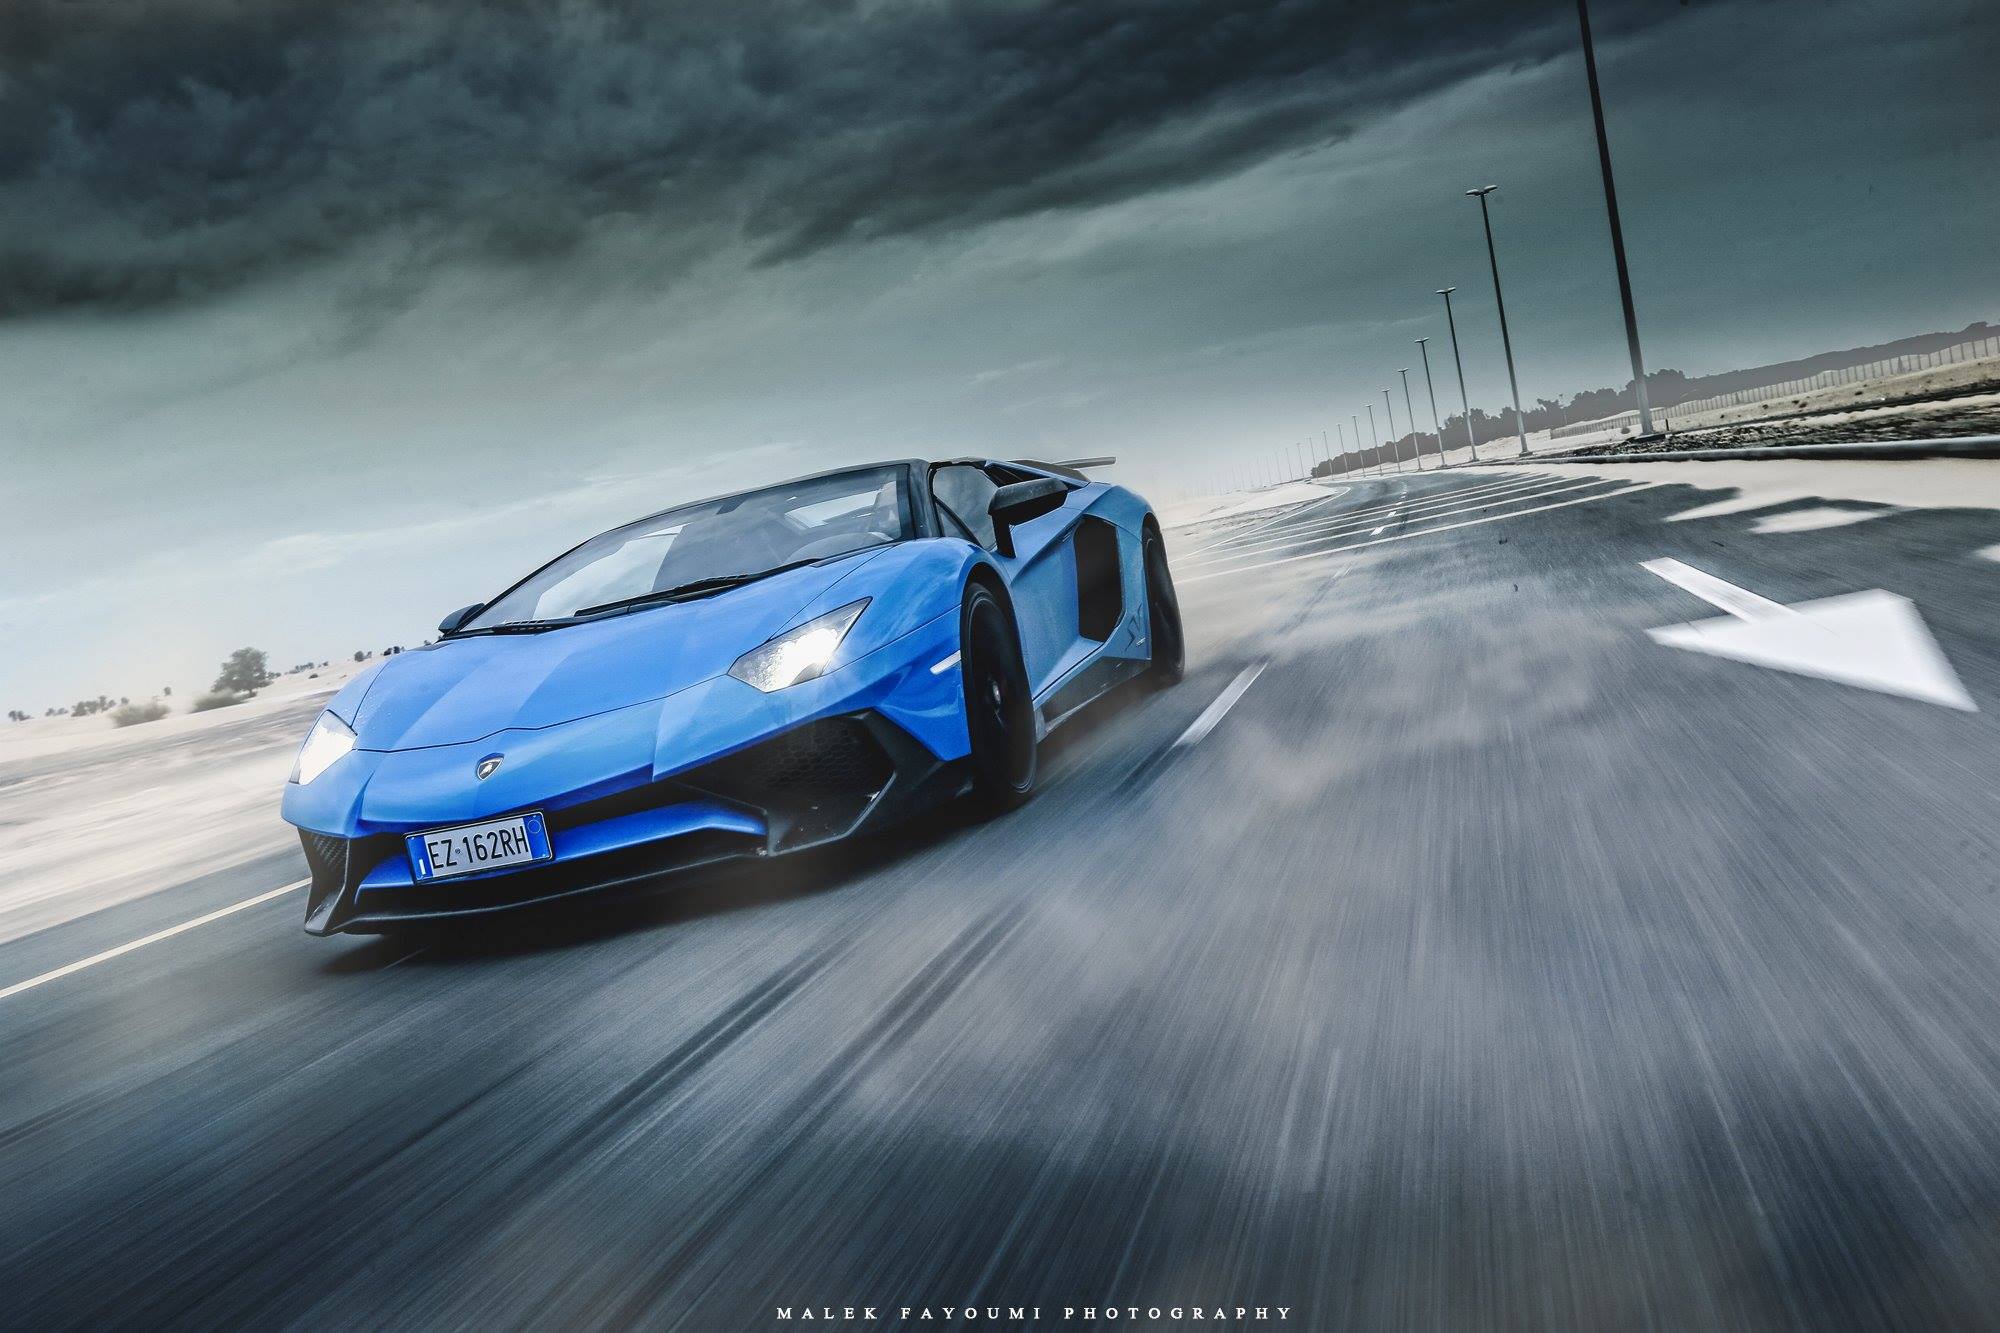 Here is another amazing picture of the Lamborghini Aventador SV